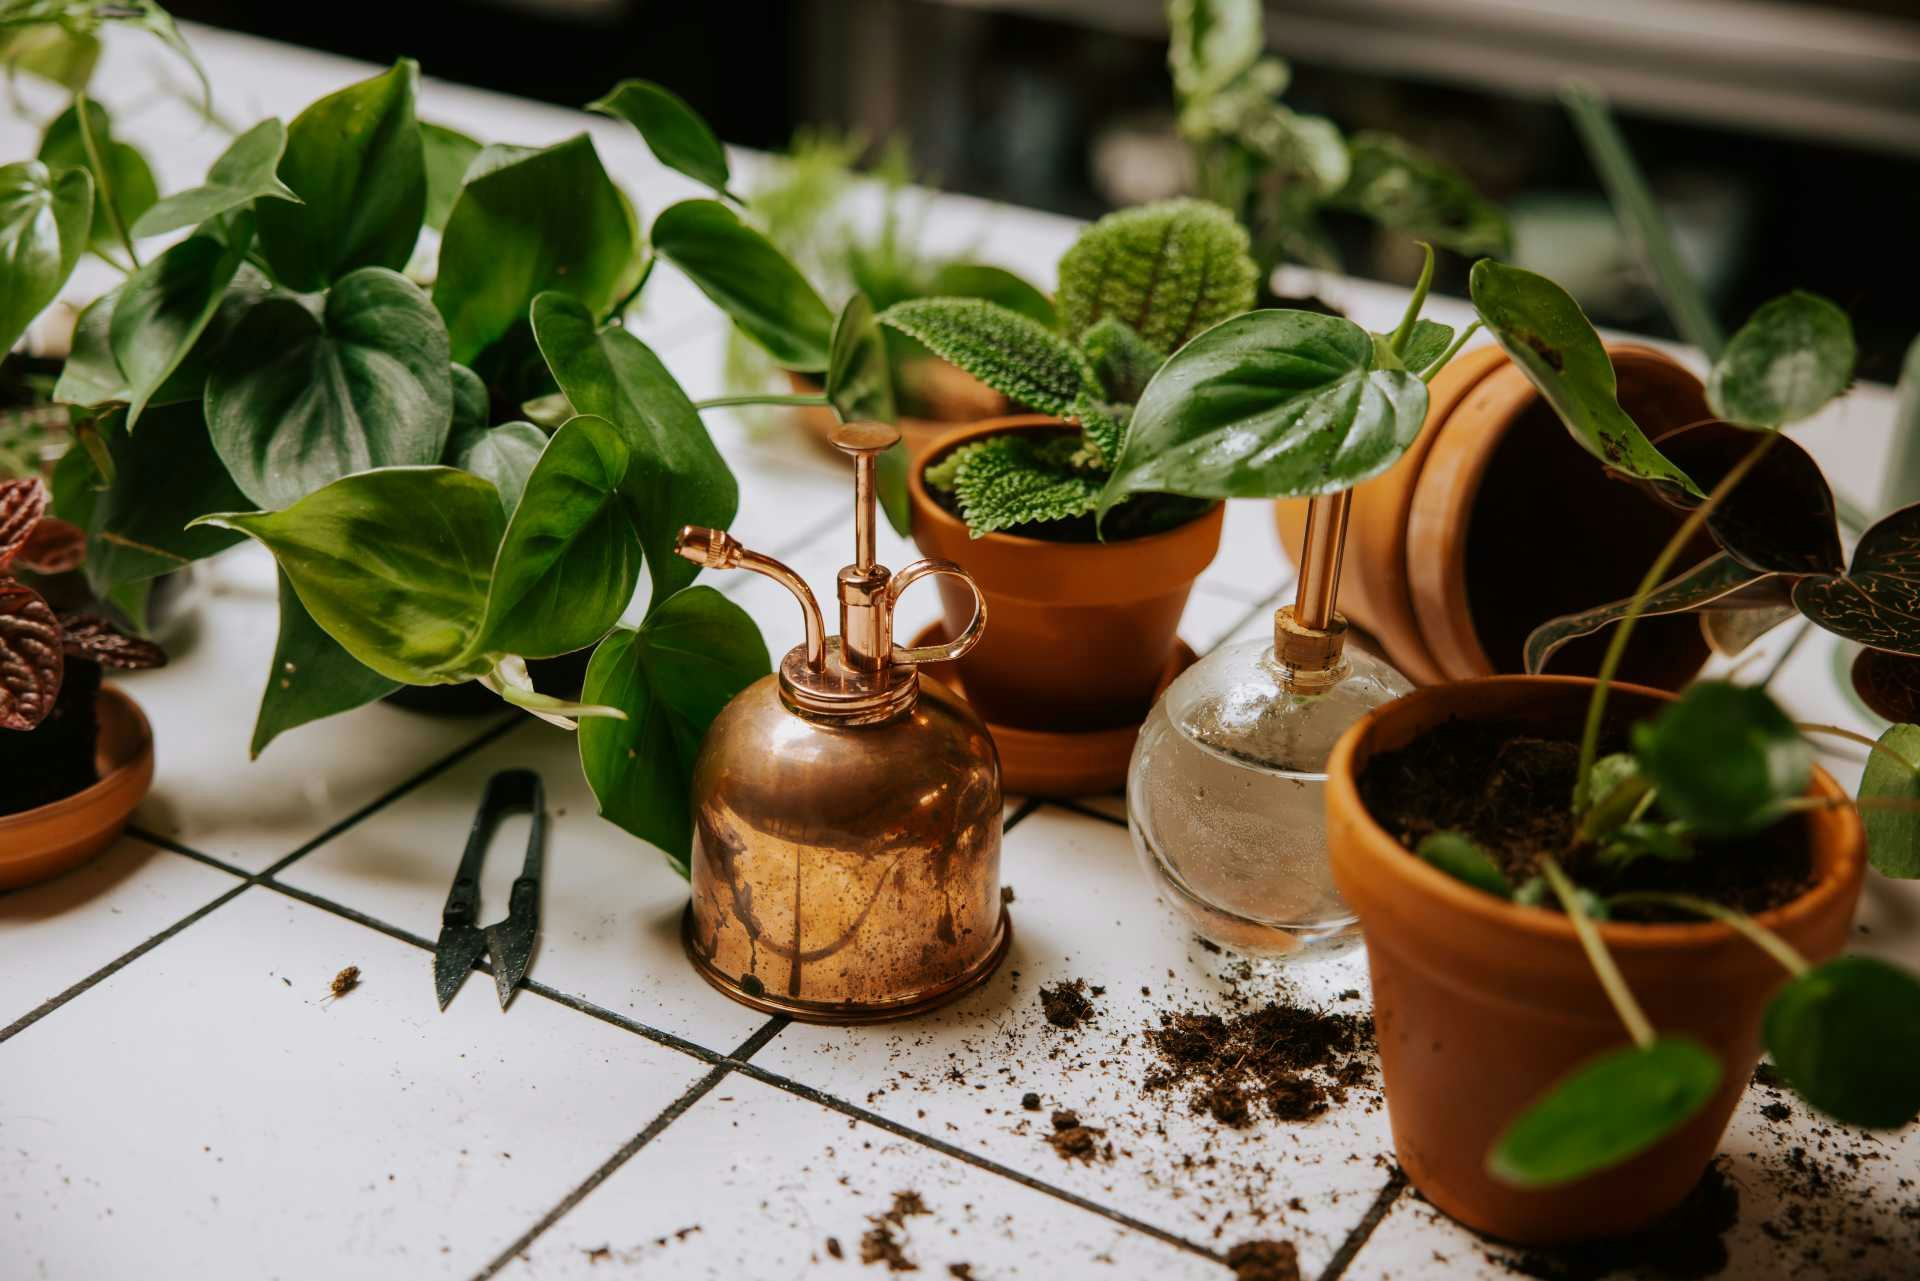 Repotting: Why and when?